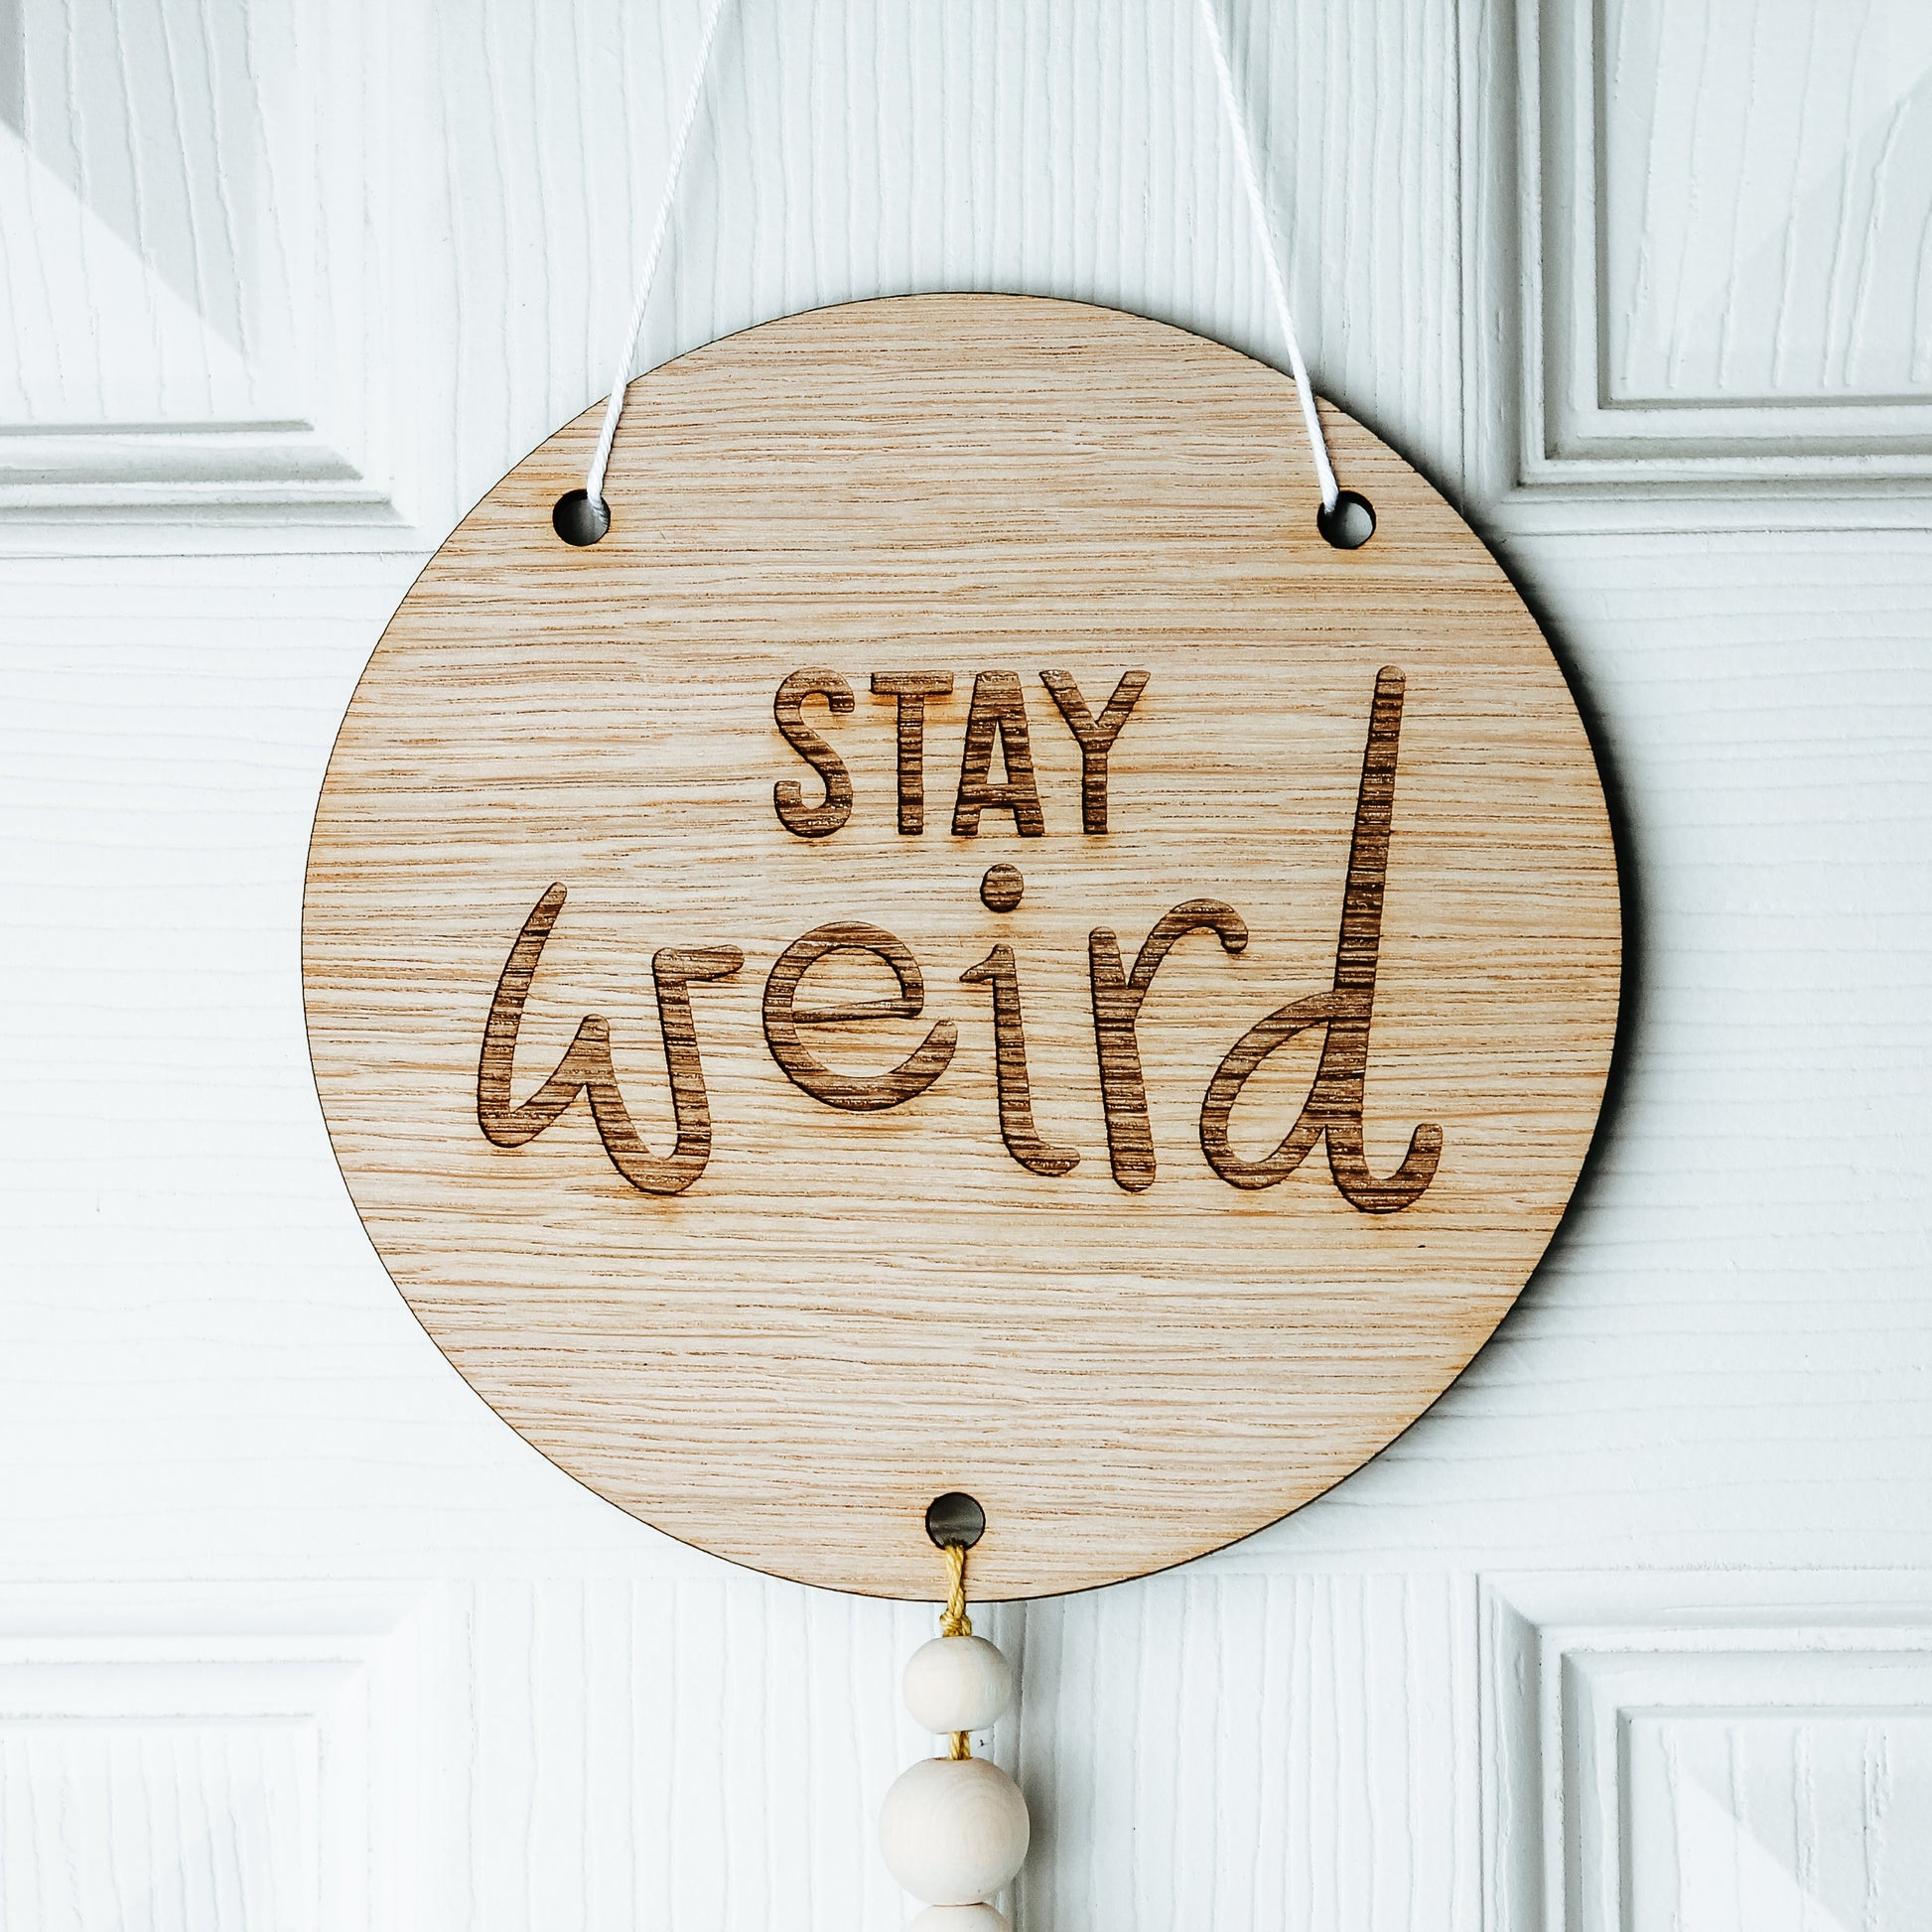 round wooden sign with stay weird engraved onto it in calligraphy writing